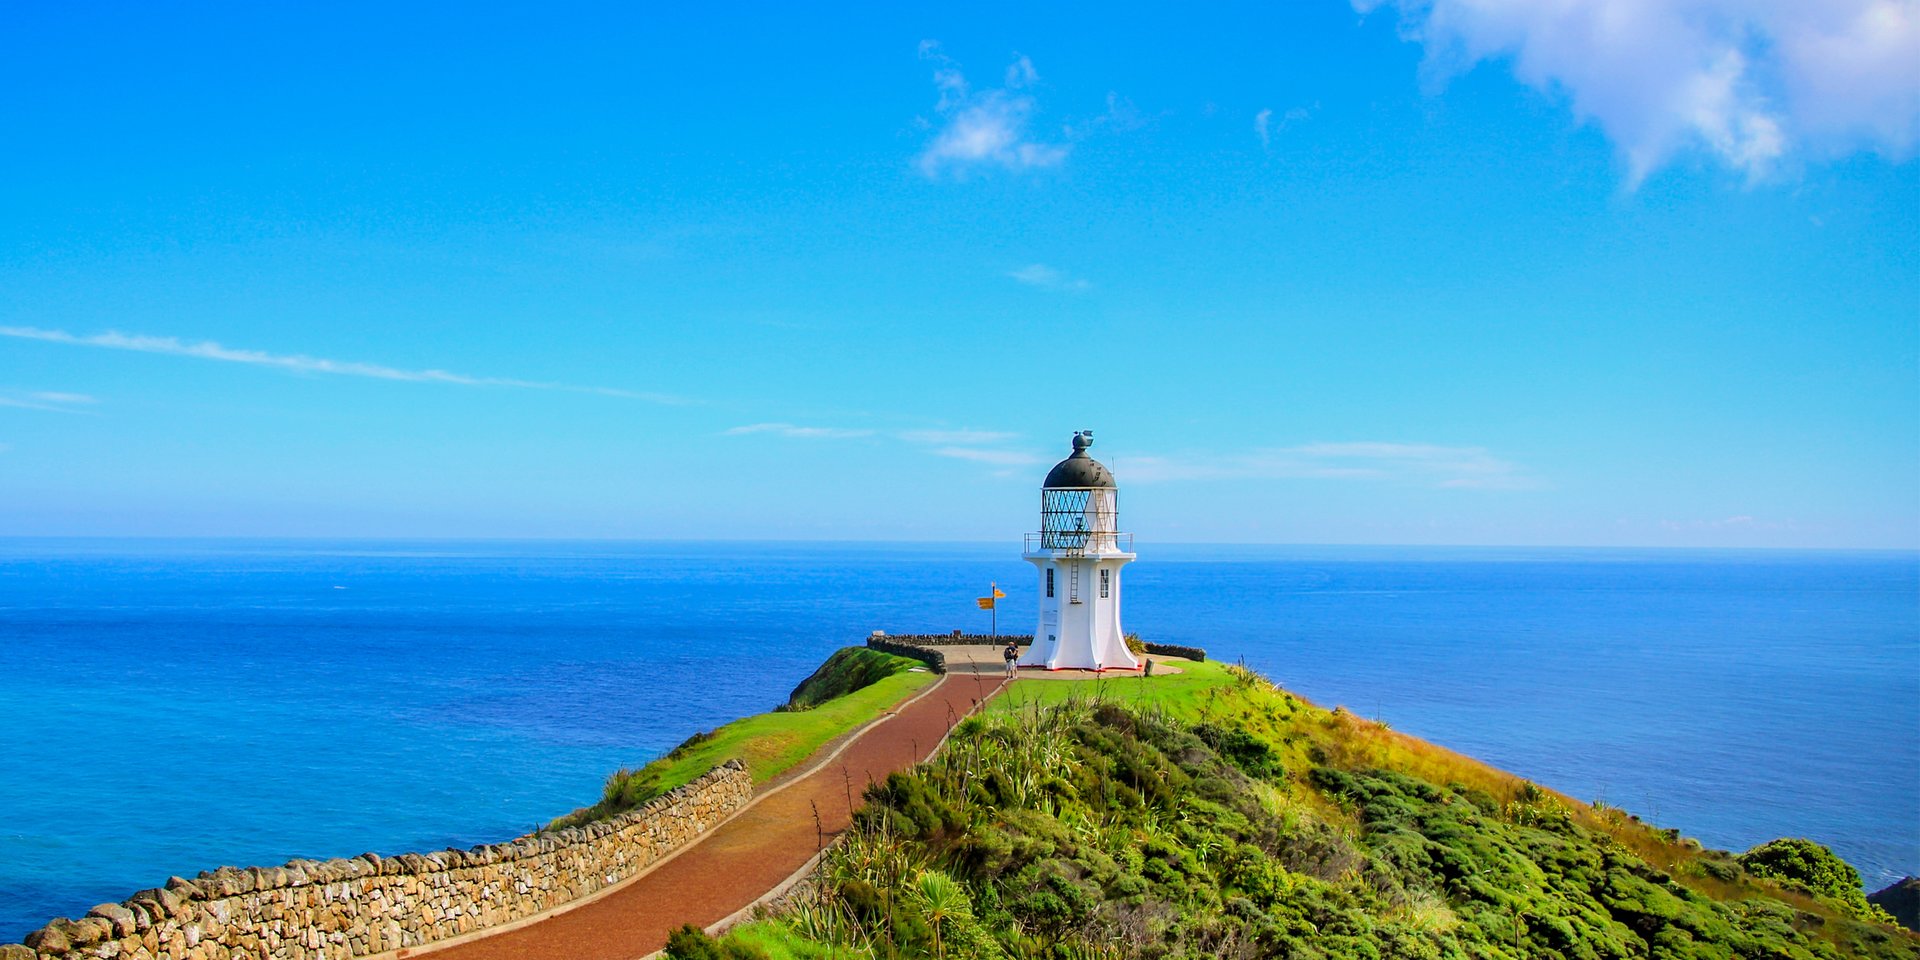 Lighthouse on the northern island of new zealand